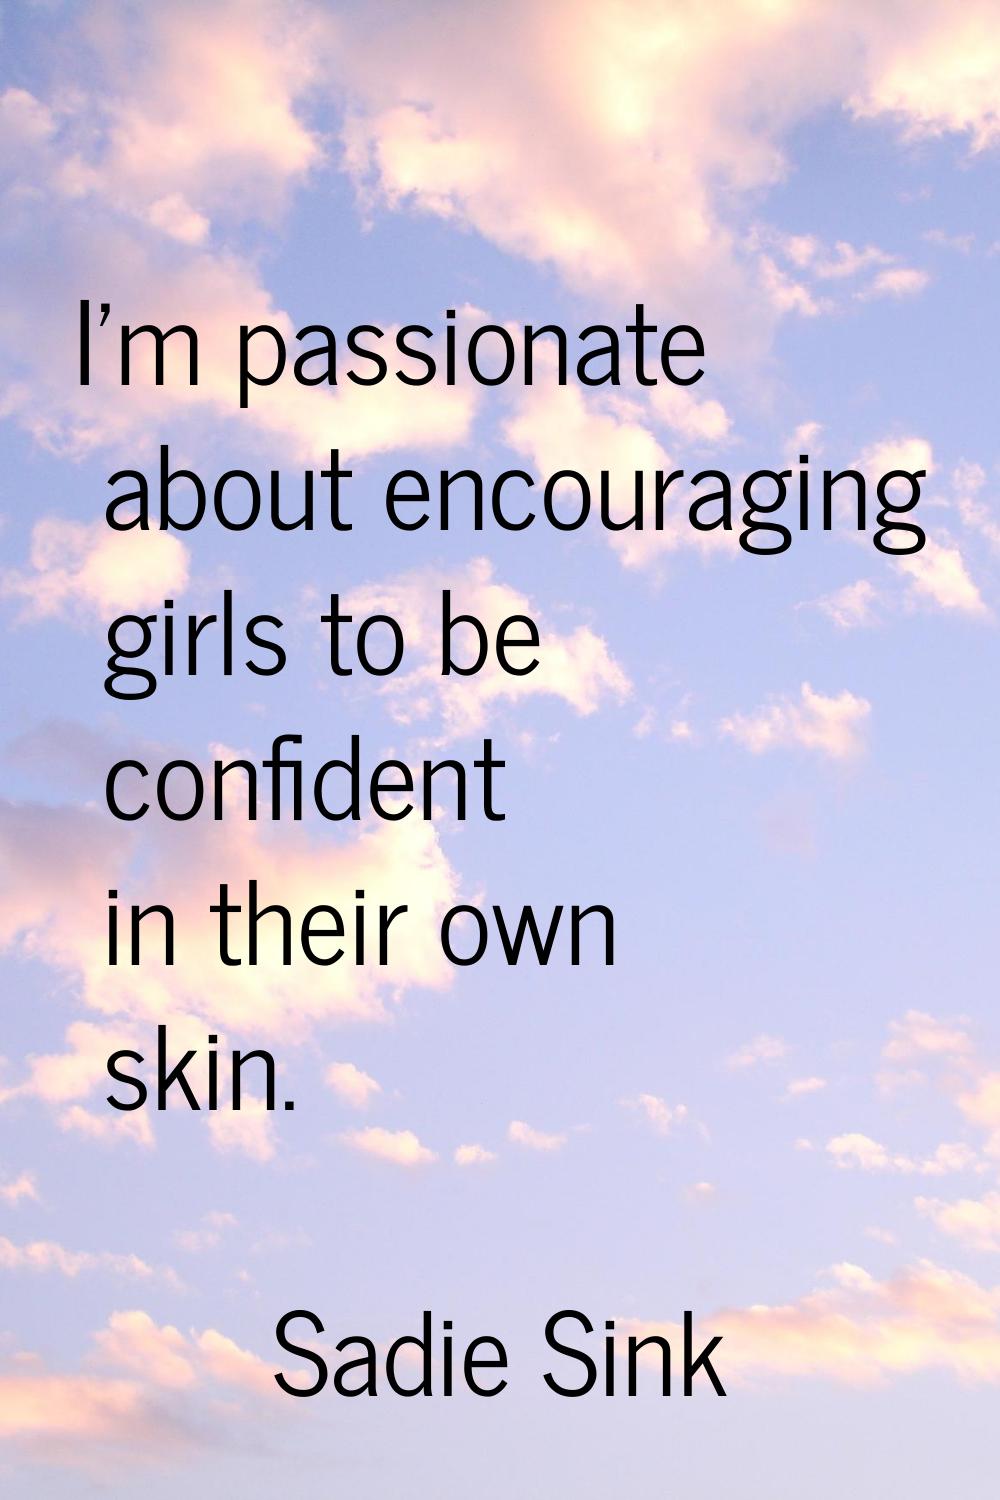 I'm passionate about encouraging girls to be confident in their own skin.